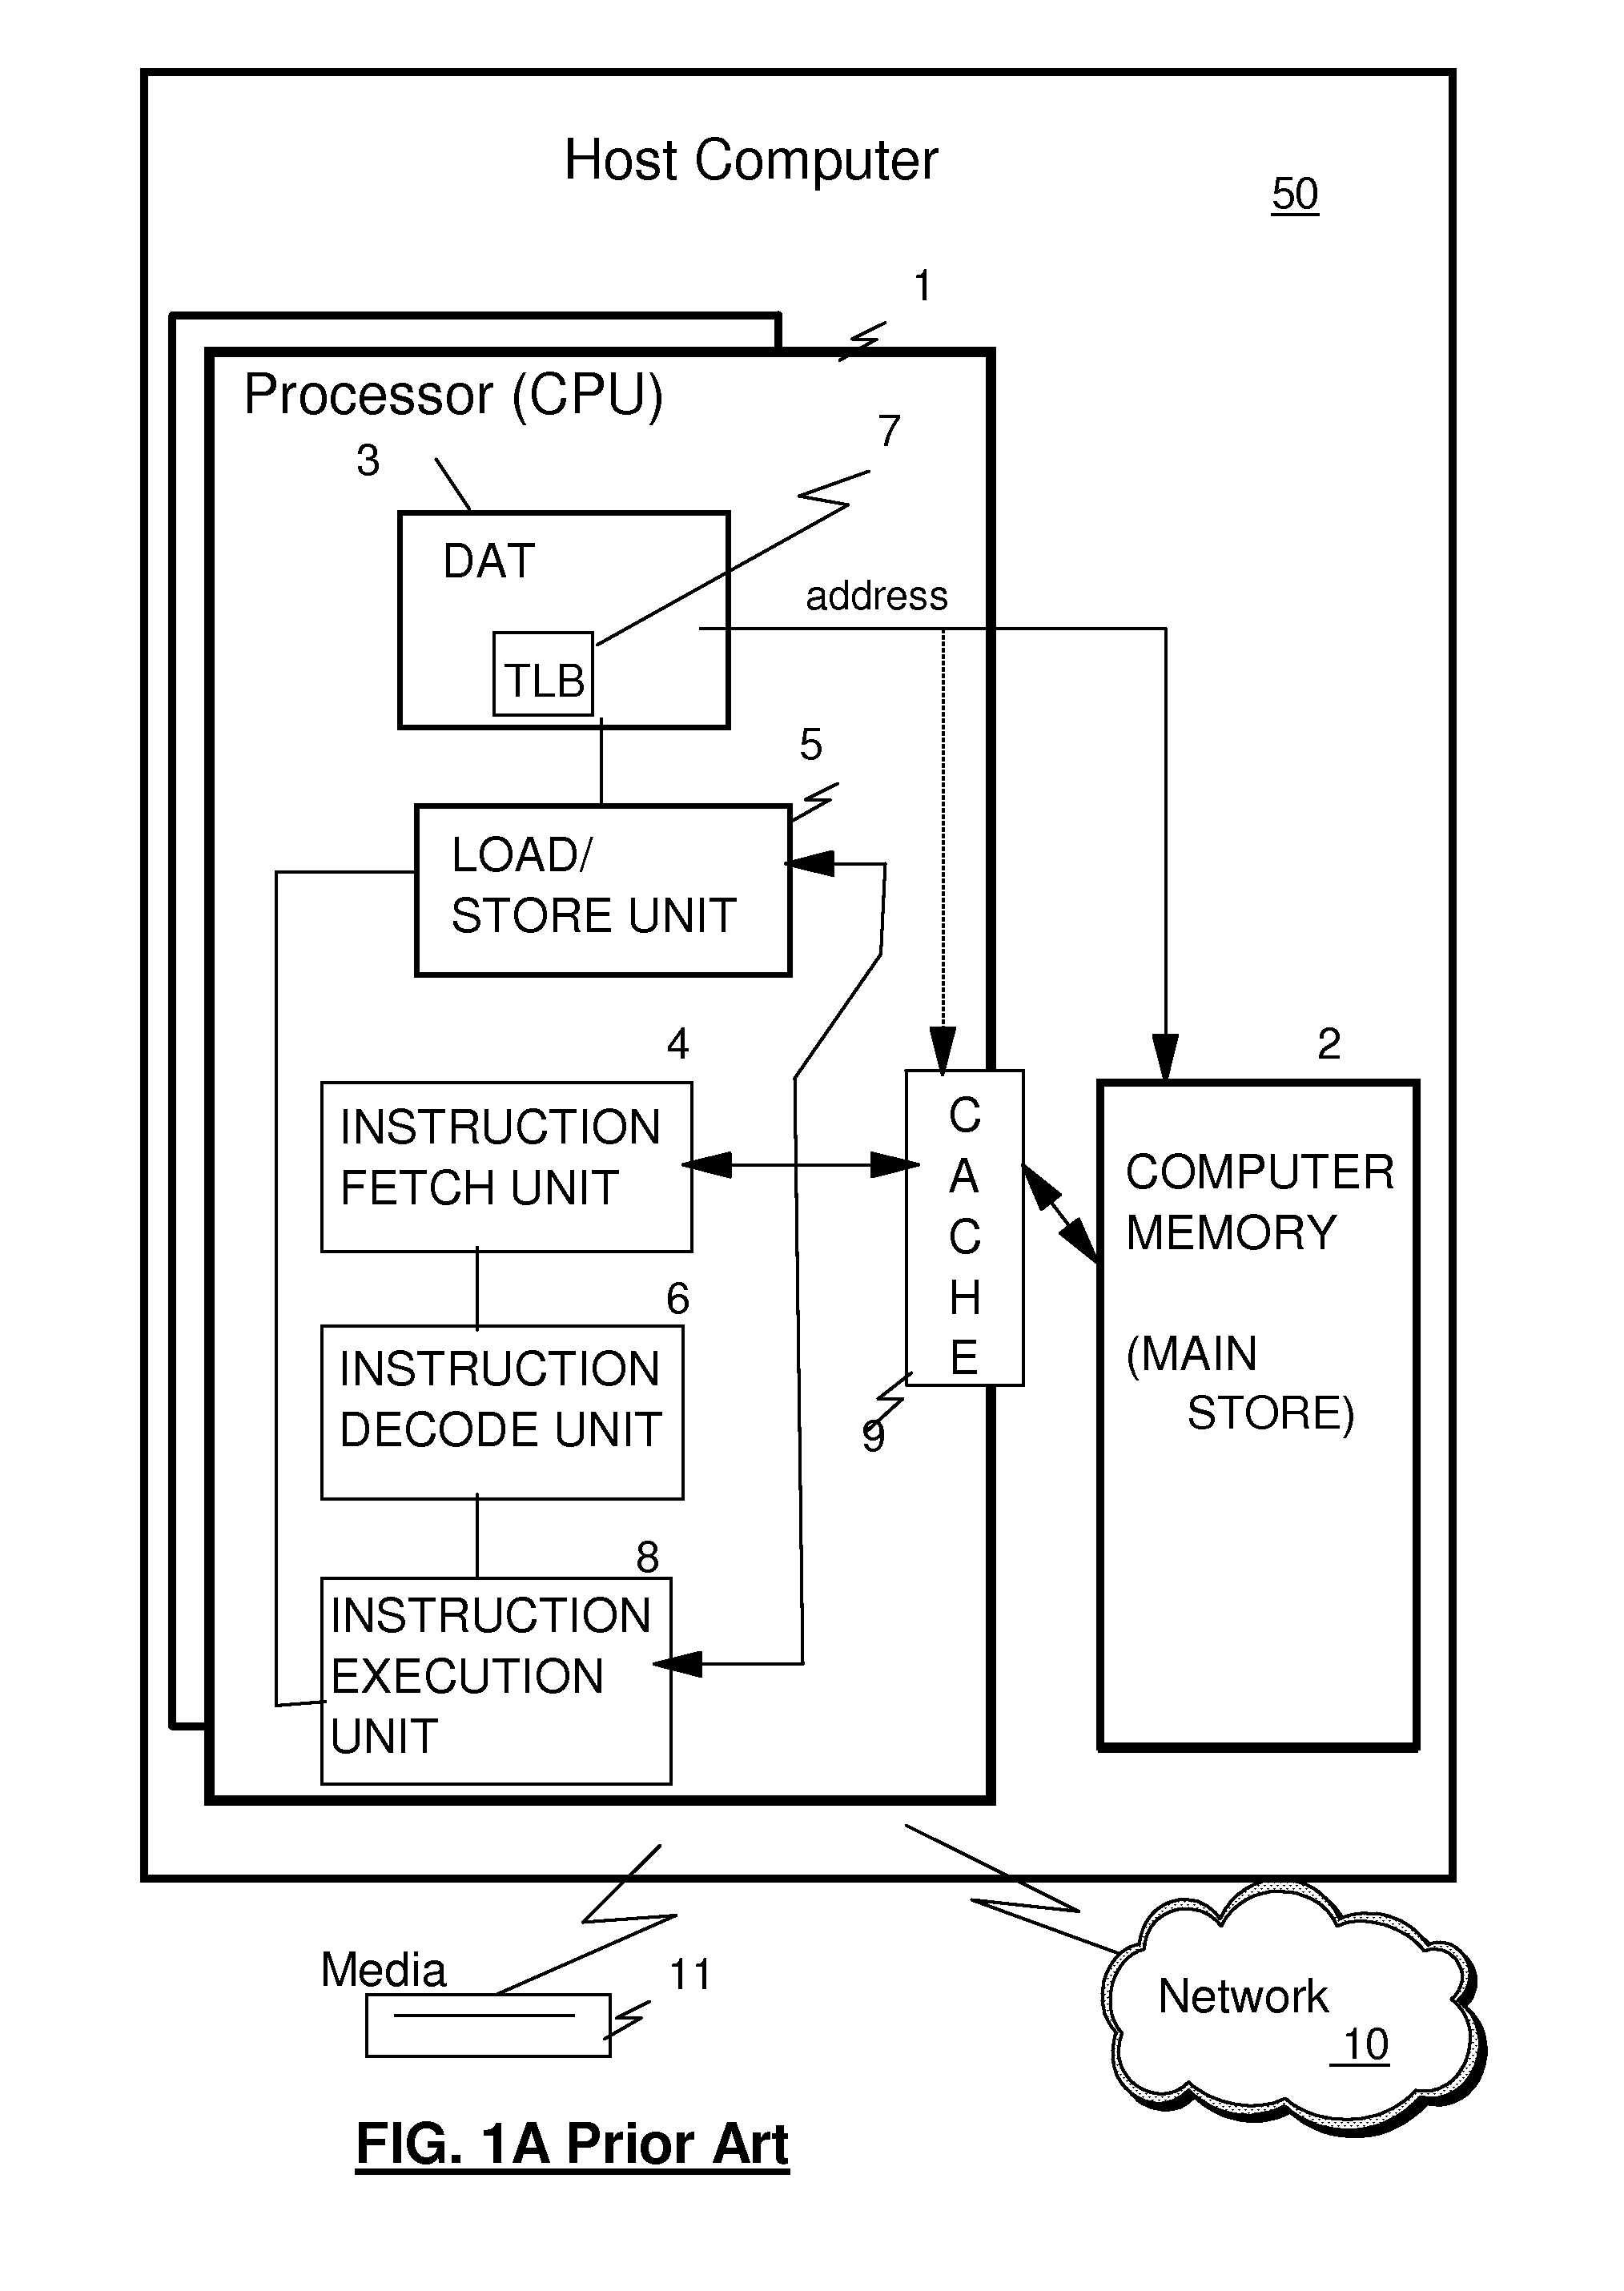 Load pair disjoint facility and instruction therefore